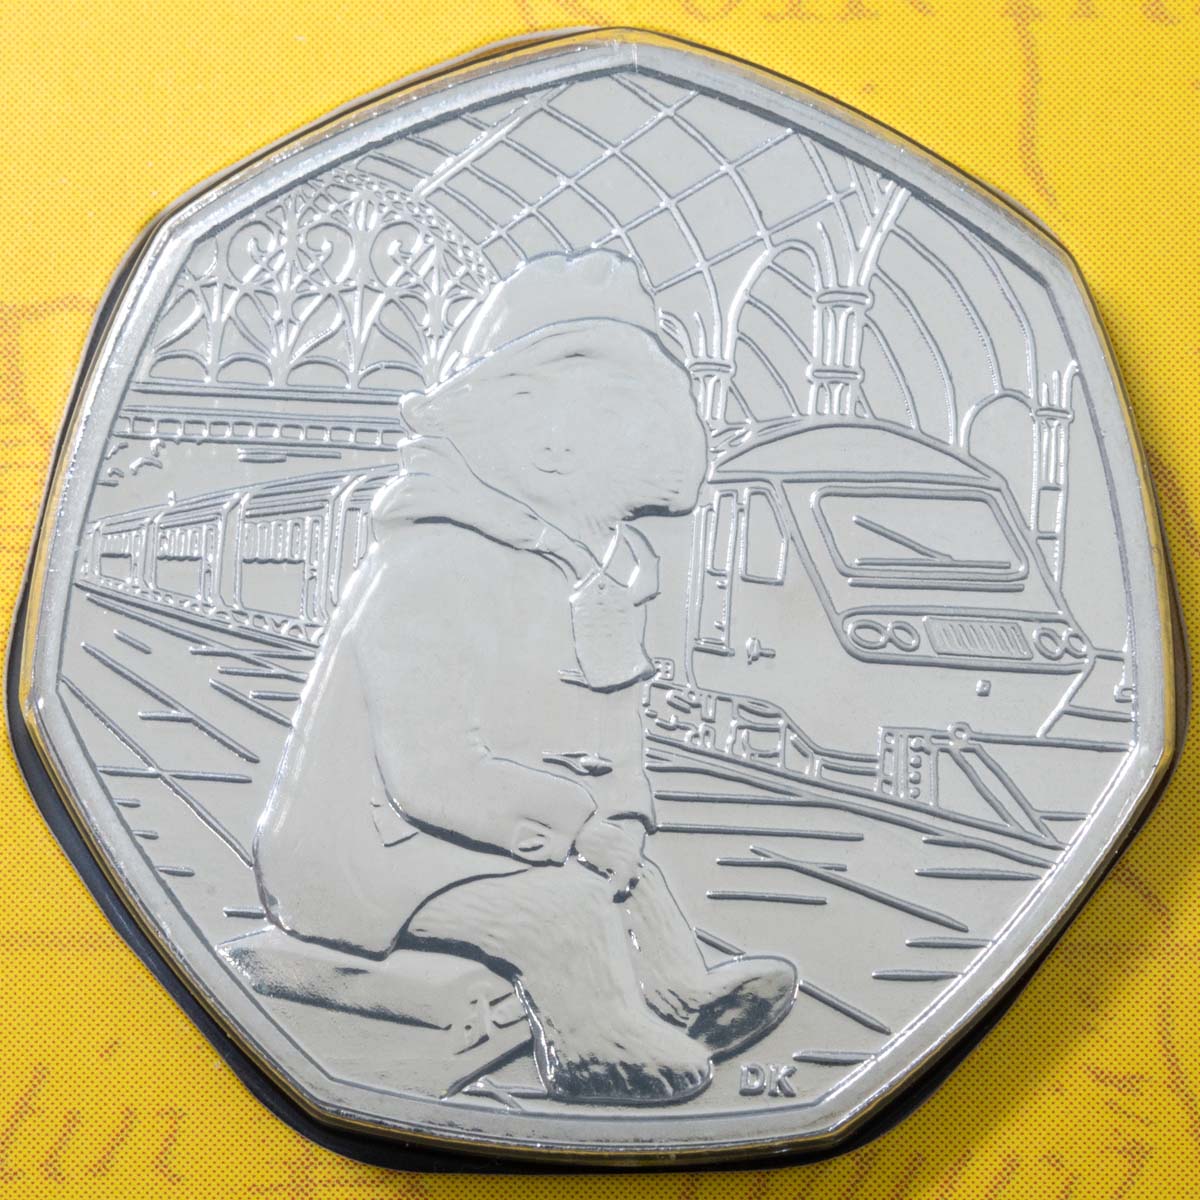 UK18P2BU 2018 Paddington Bear At The Station Fifty Pence Brilliant Uncirculated Coin In Folder Reverse